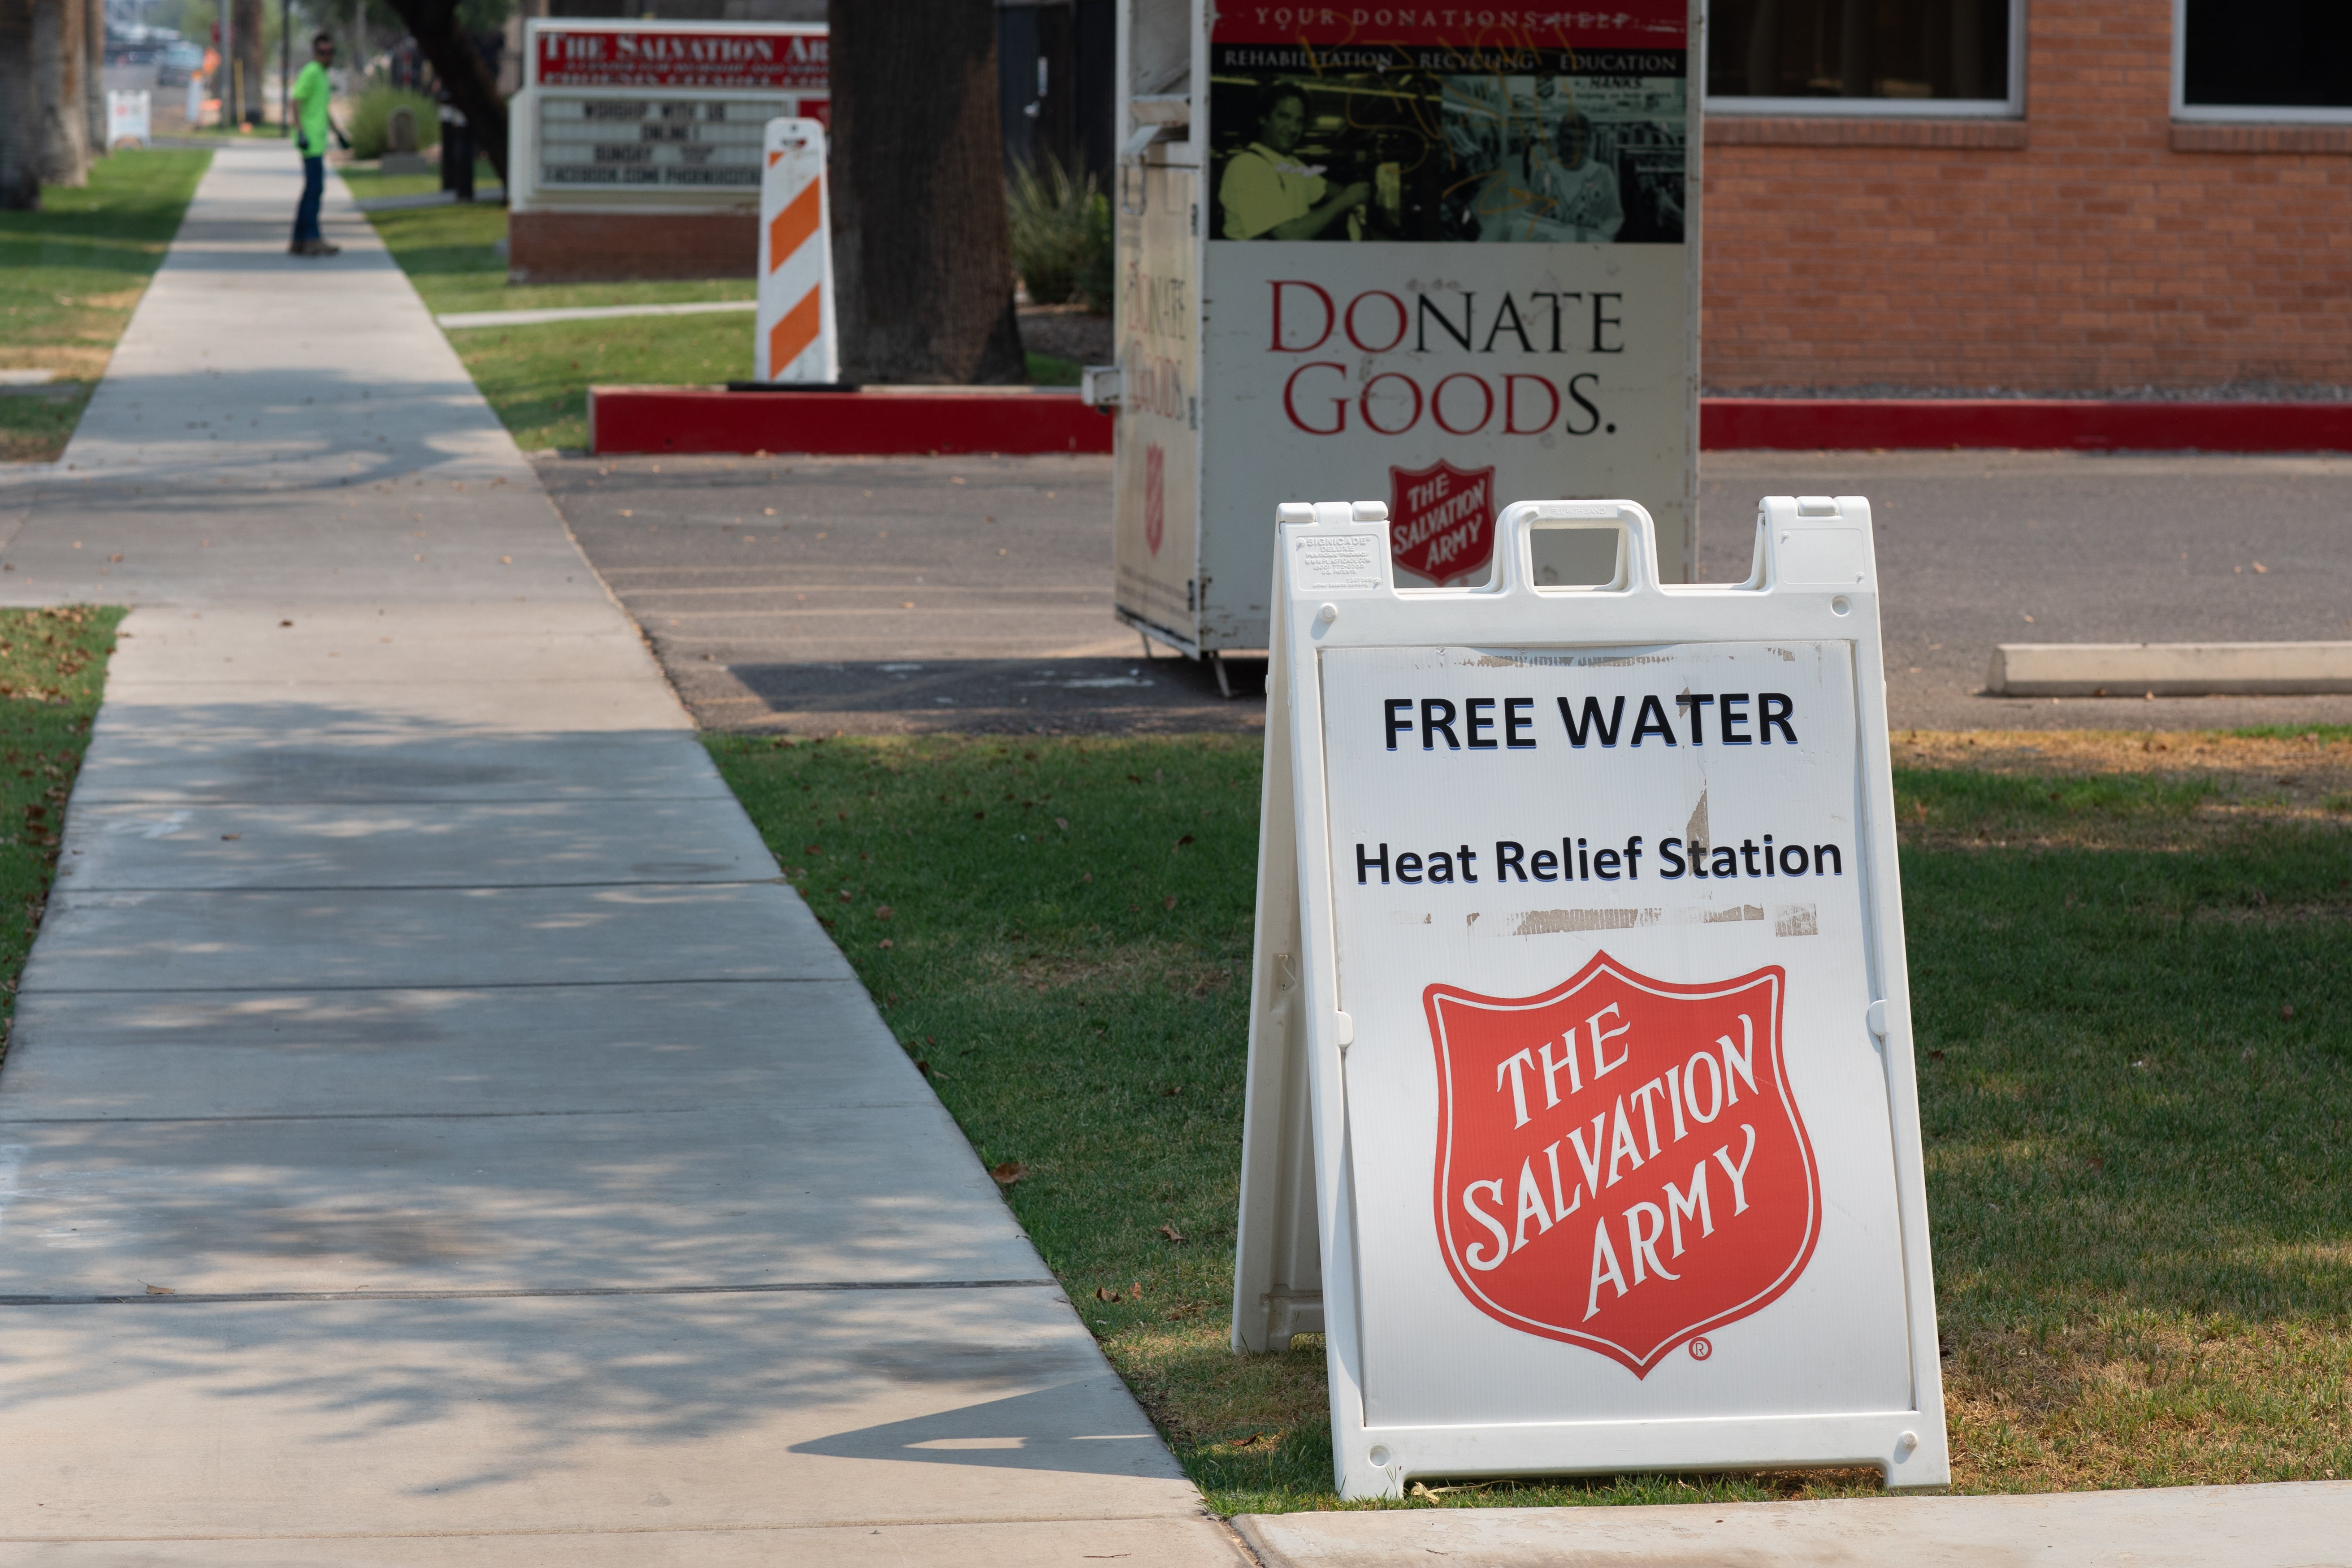 File: A heat relief station is set up at the Salvation Army Phoenix Citadel on 15 June 2021 in Phoenix, Arizona